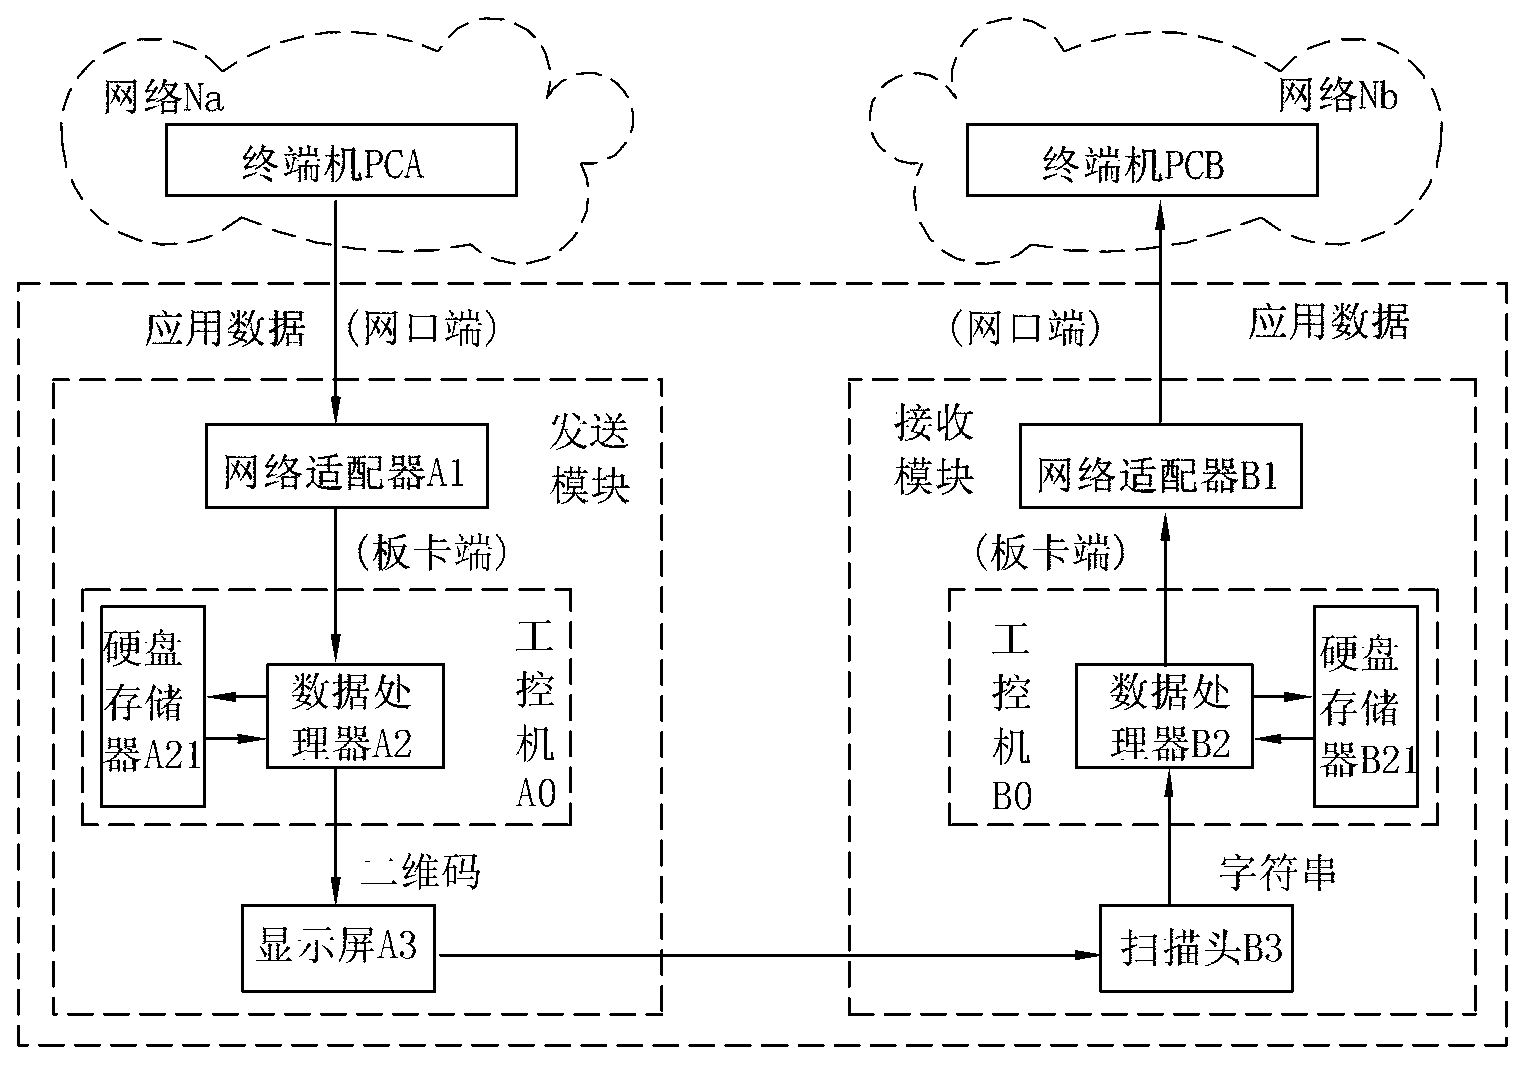 Method and device for cross-network safe transmission